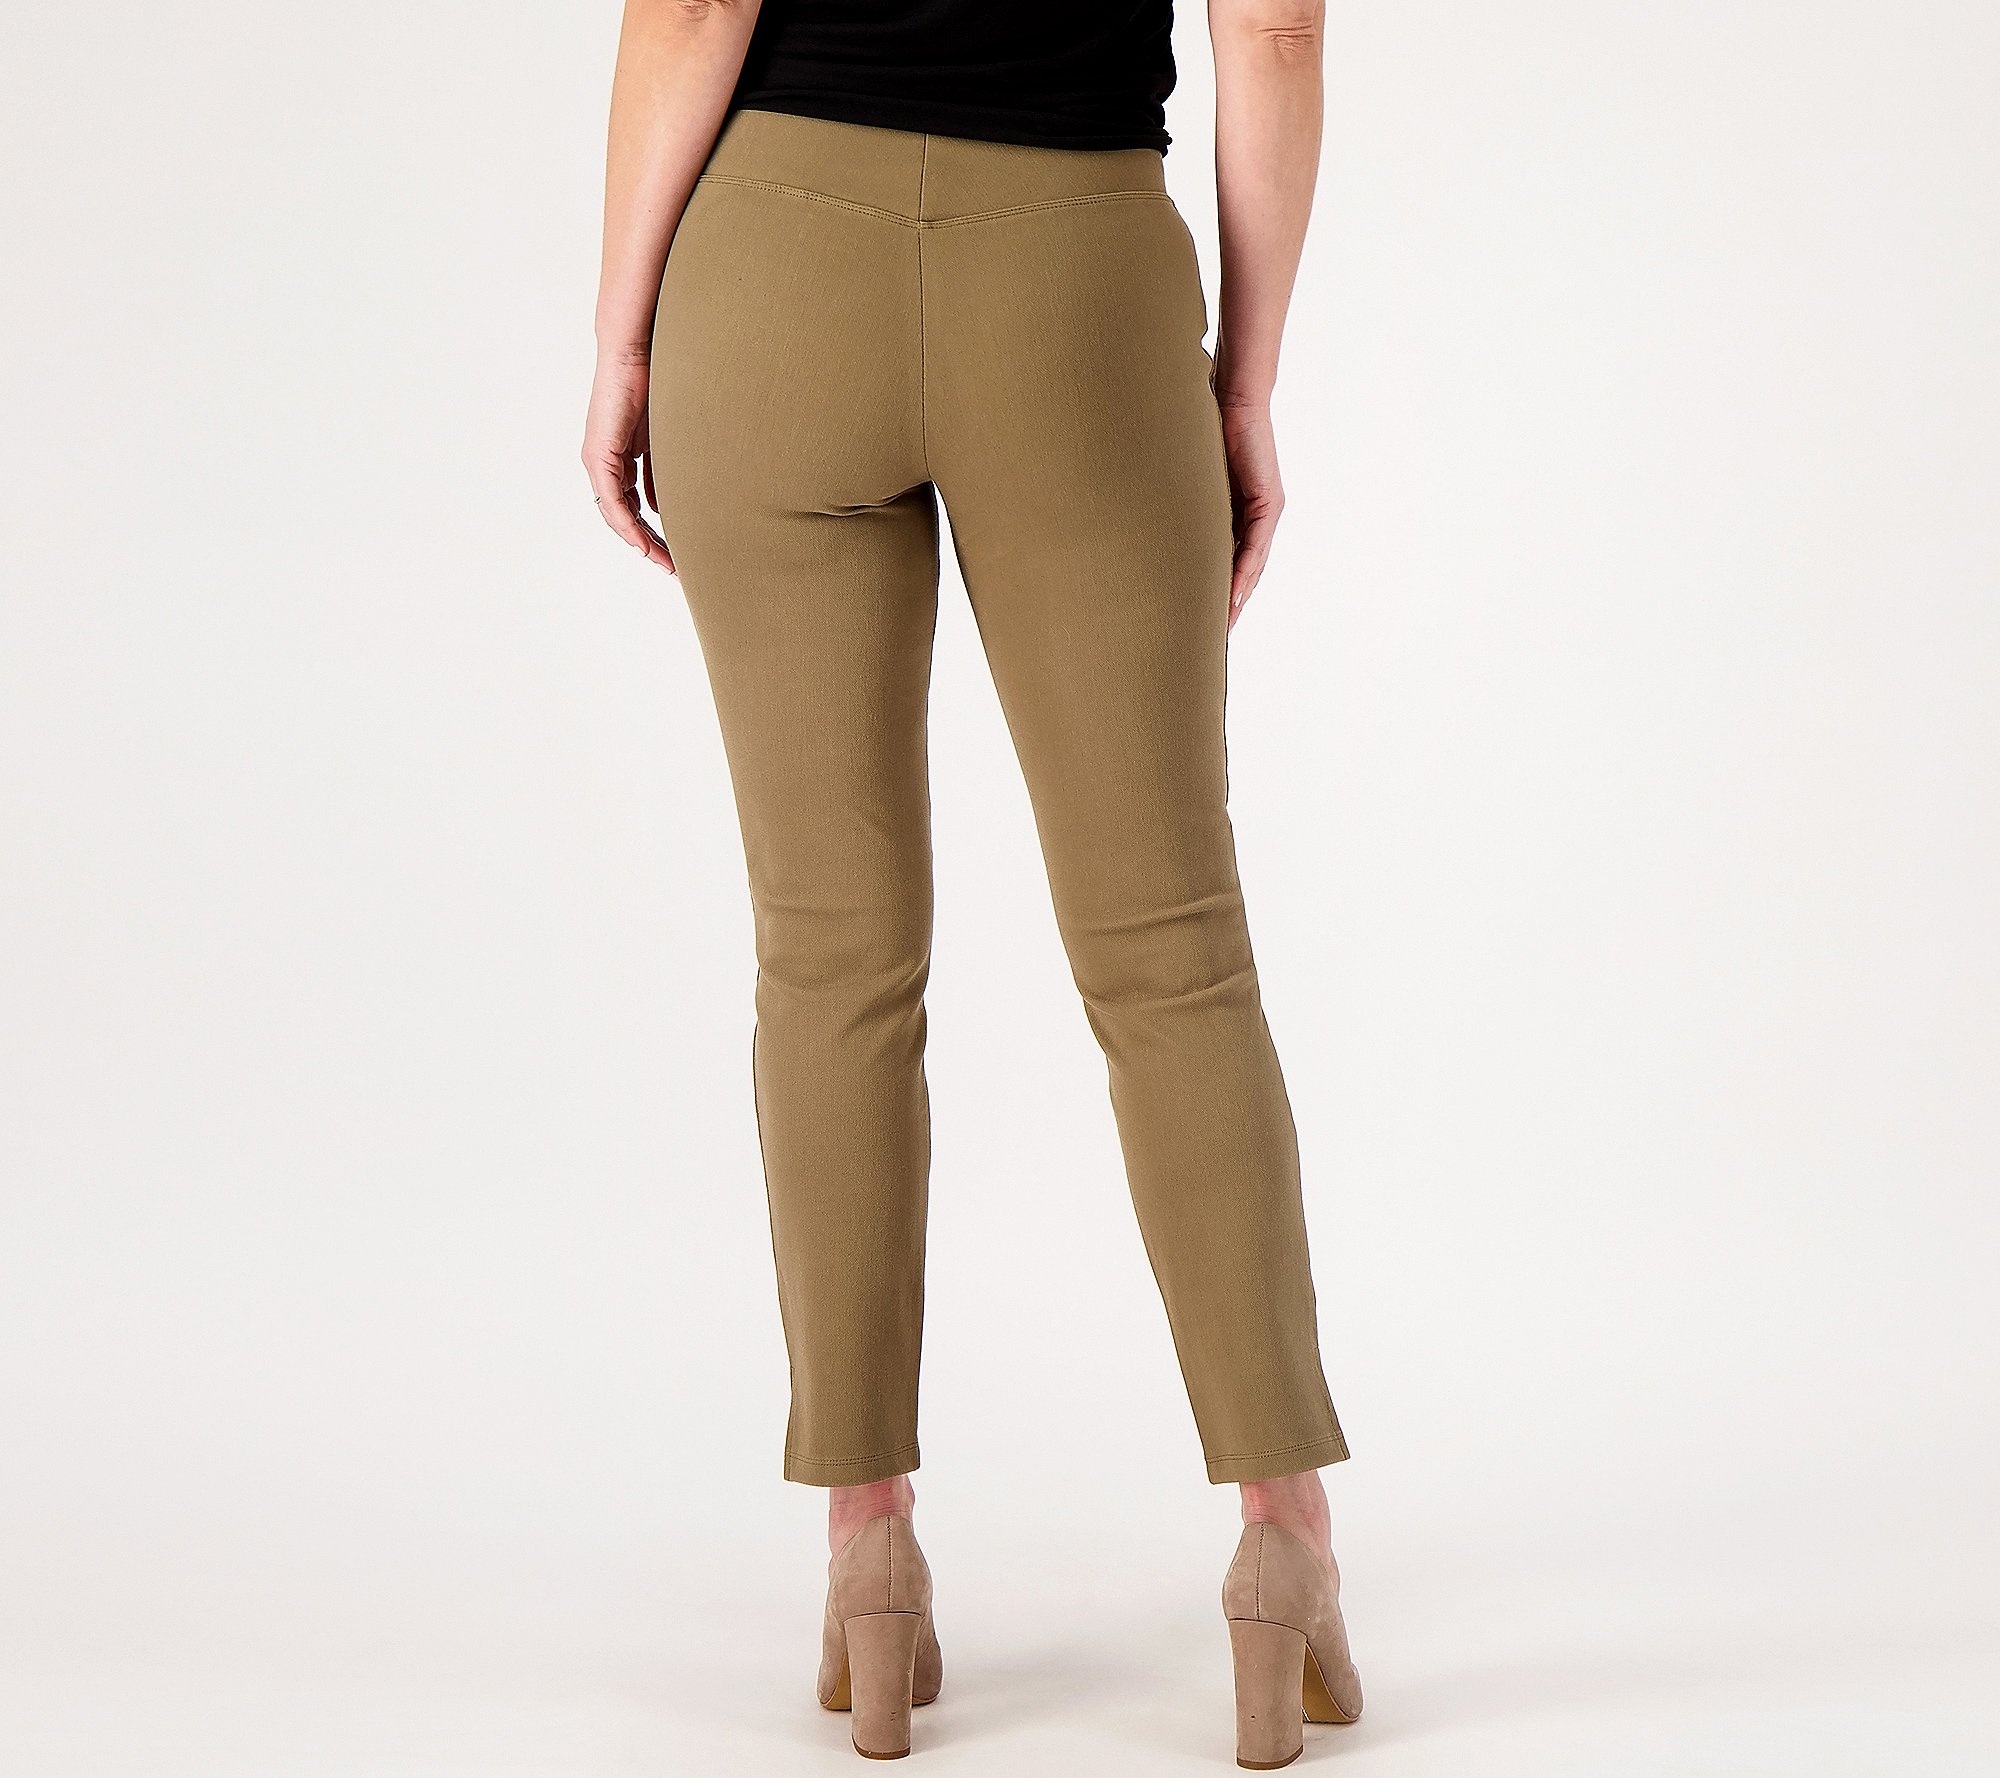 Women with Control Regular Prime Stretch Tummy Control Pants